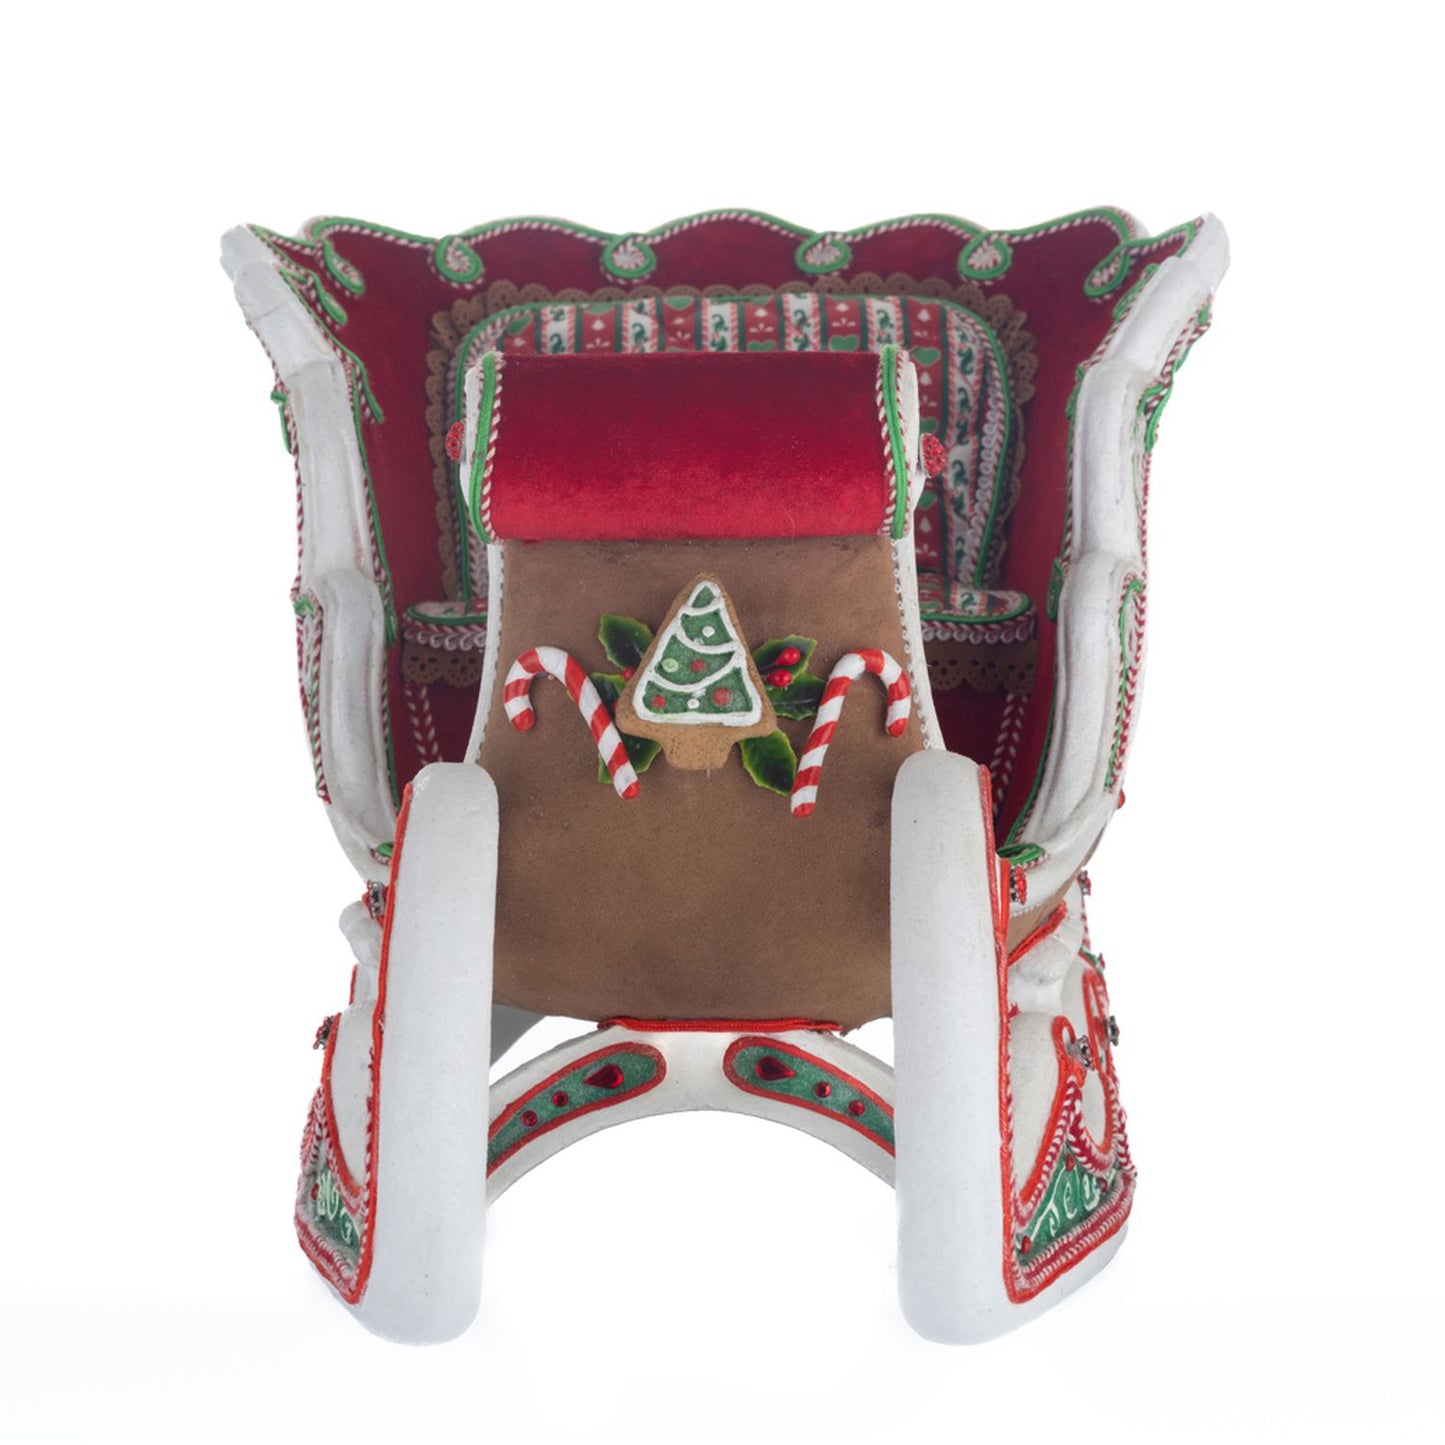 Katherine's Collection Seasoned Greetings Sleigh, 19.25x11.75x11 Inches, Green Resin